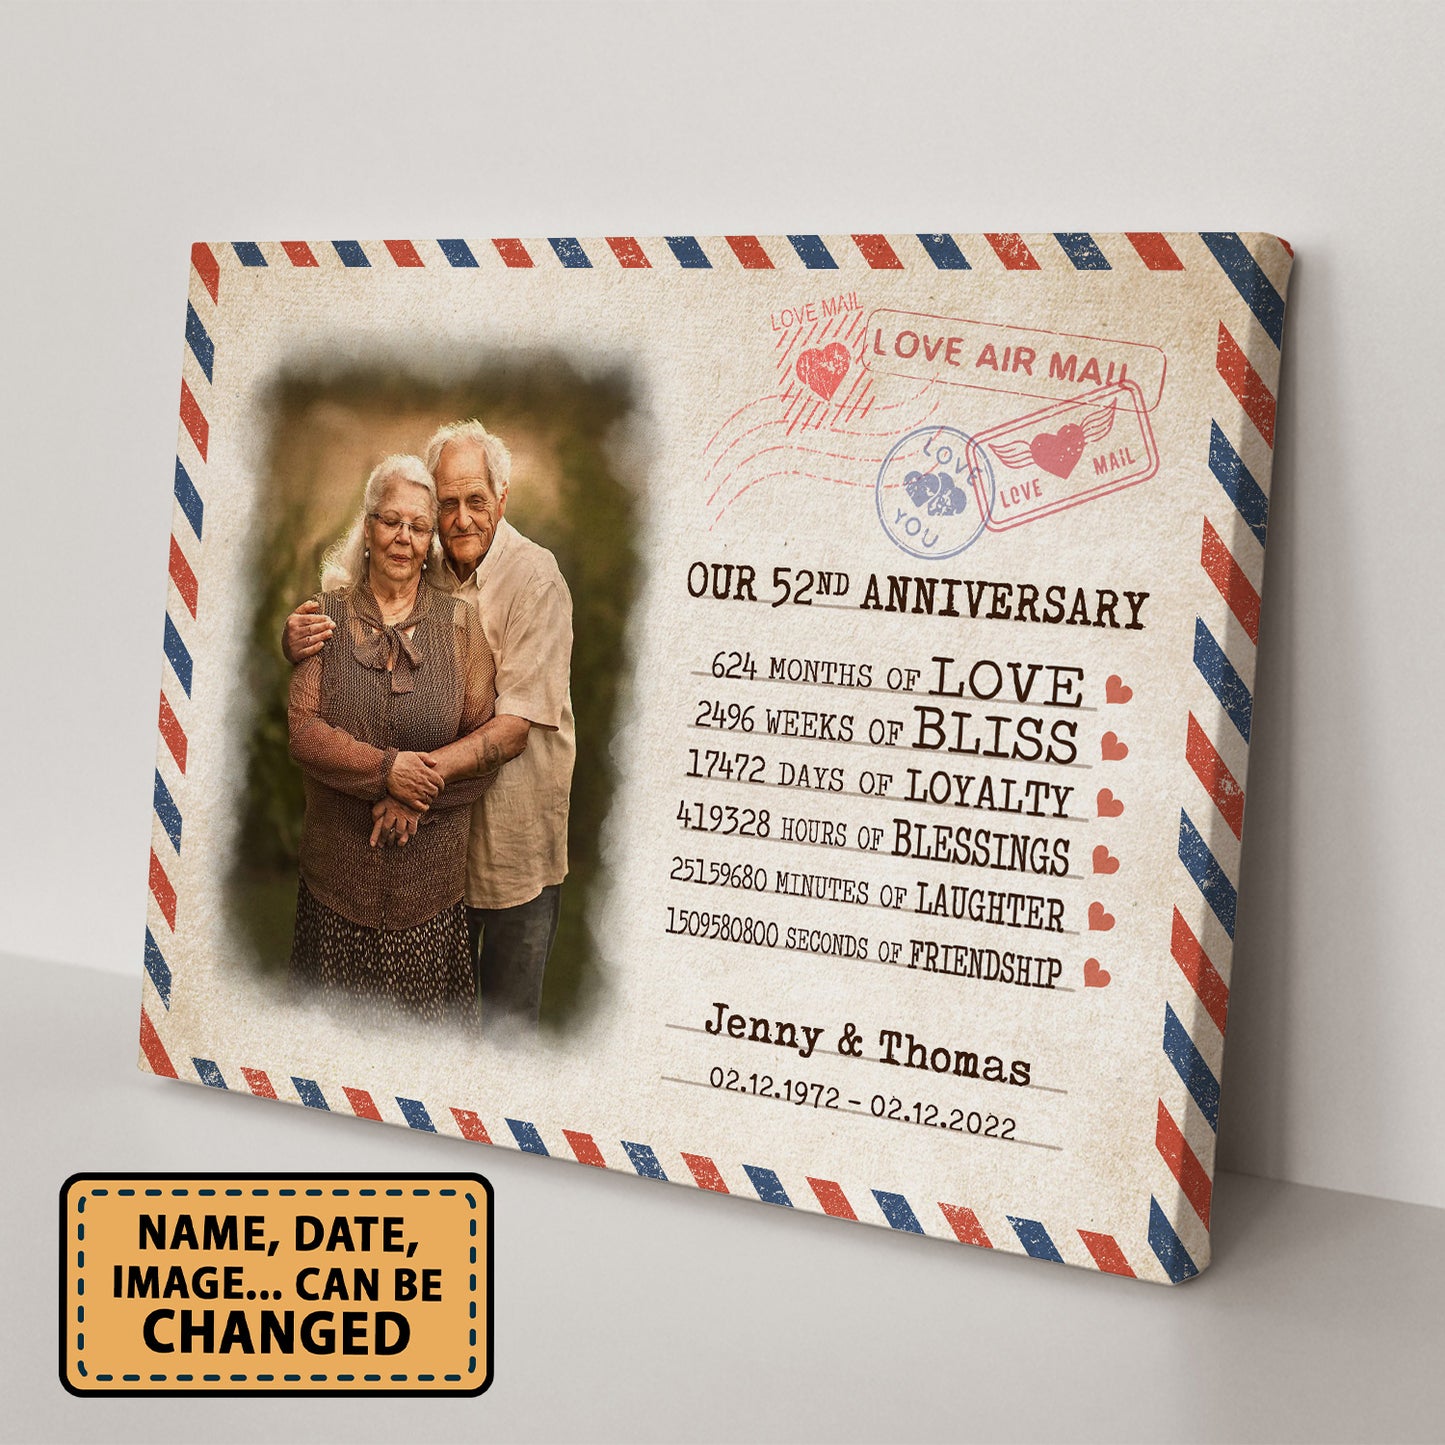 Our 52nd Anniversary Letter Valentine Gift Personalized Canvas